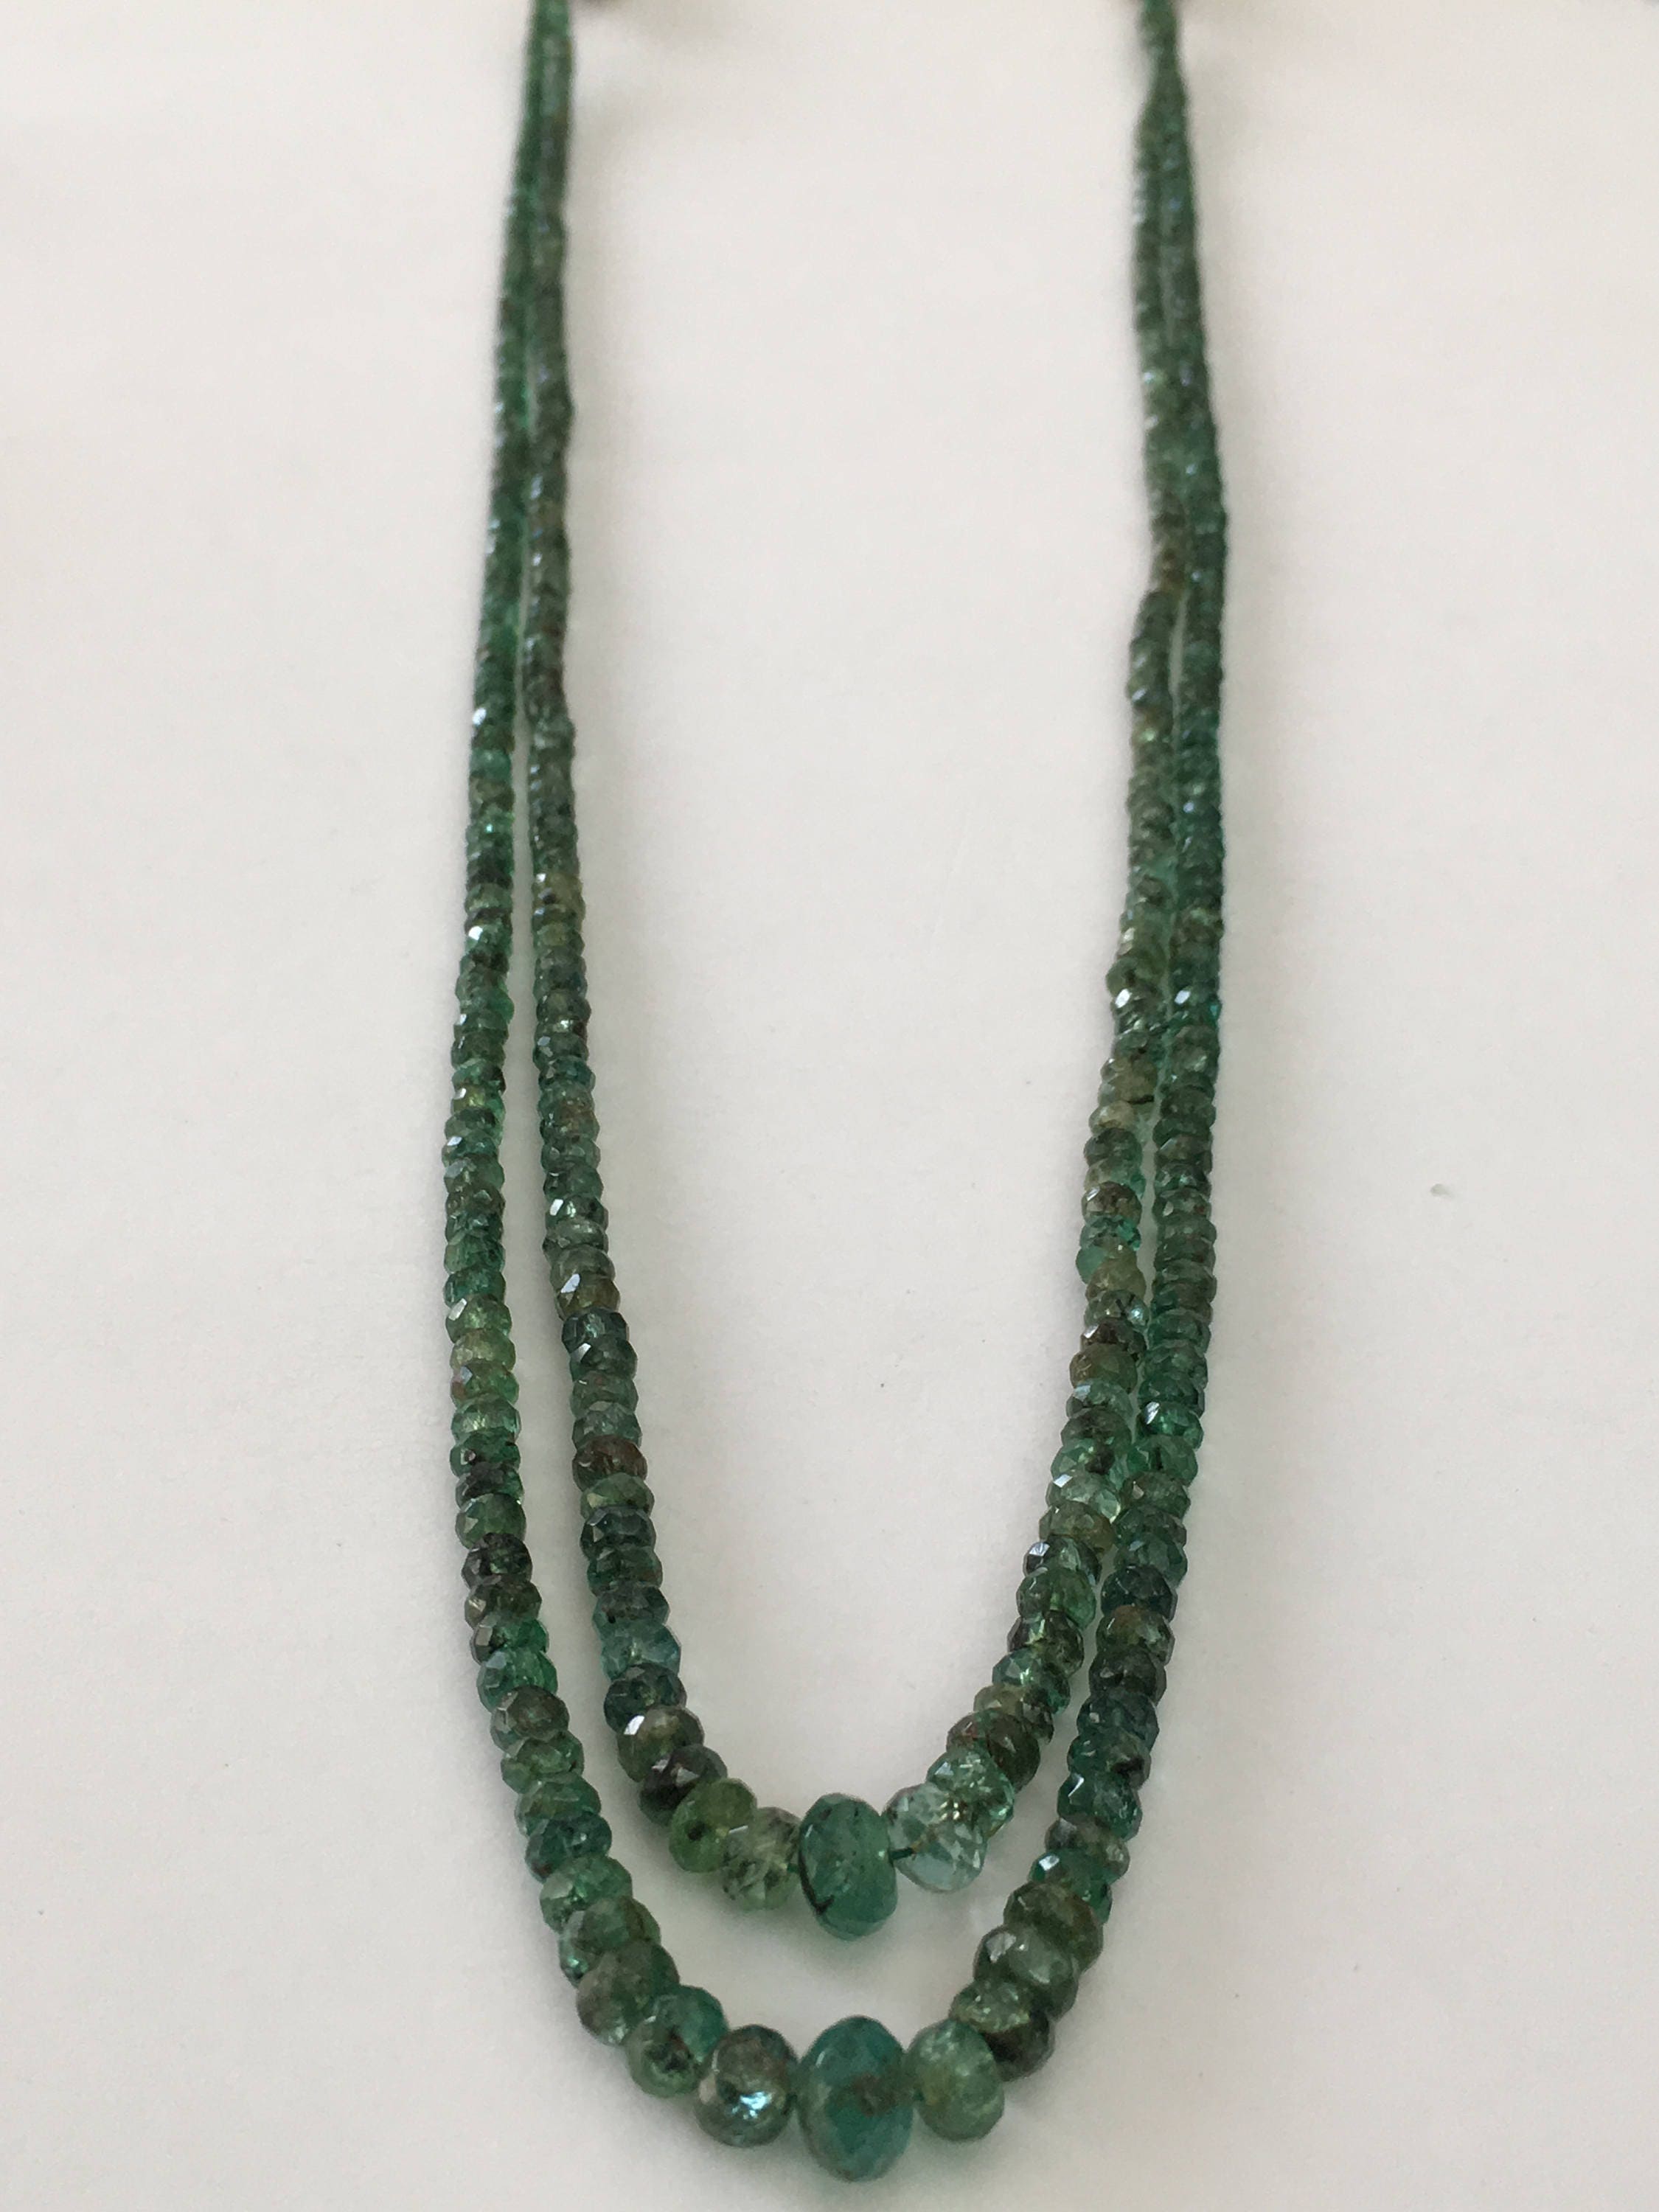 Rare Emerald faceted beads necklace 2.3 mm to 7mm faceted emerald beads ...